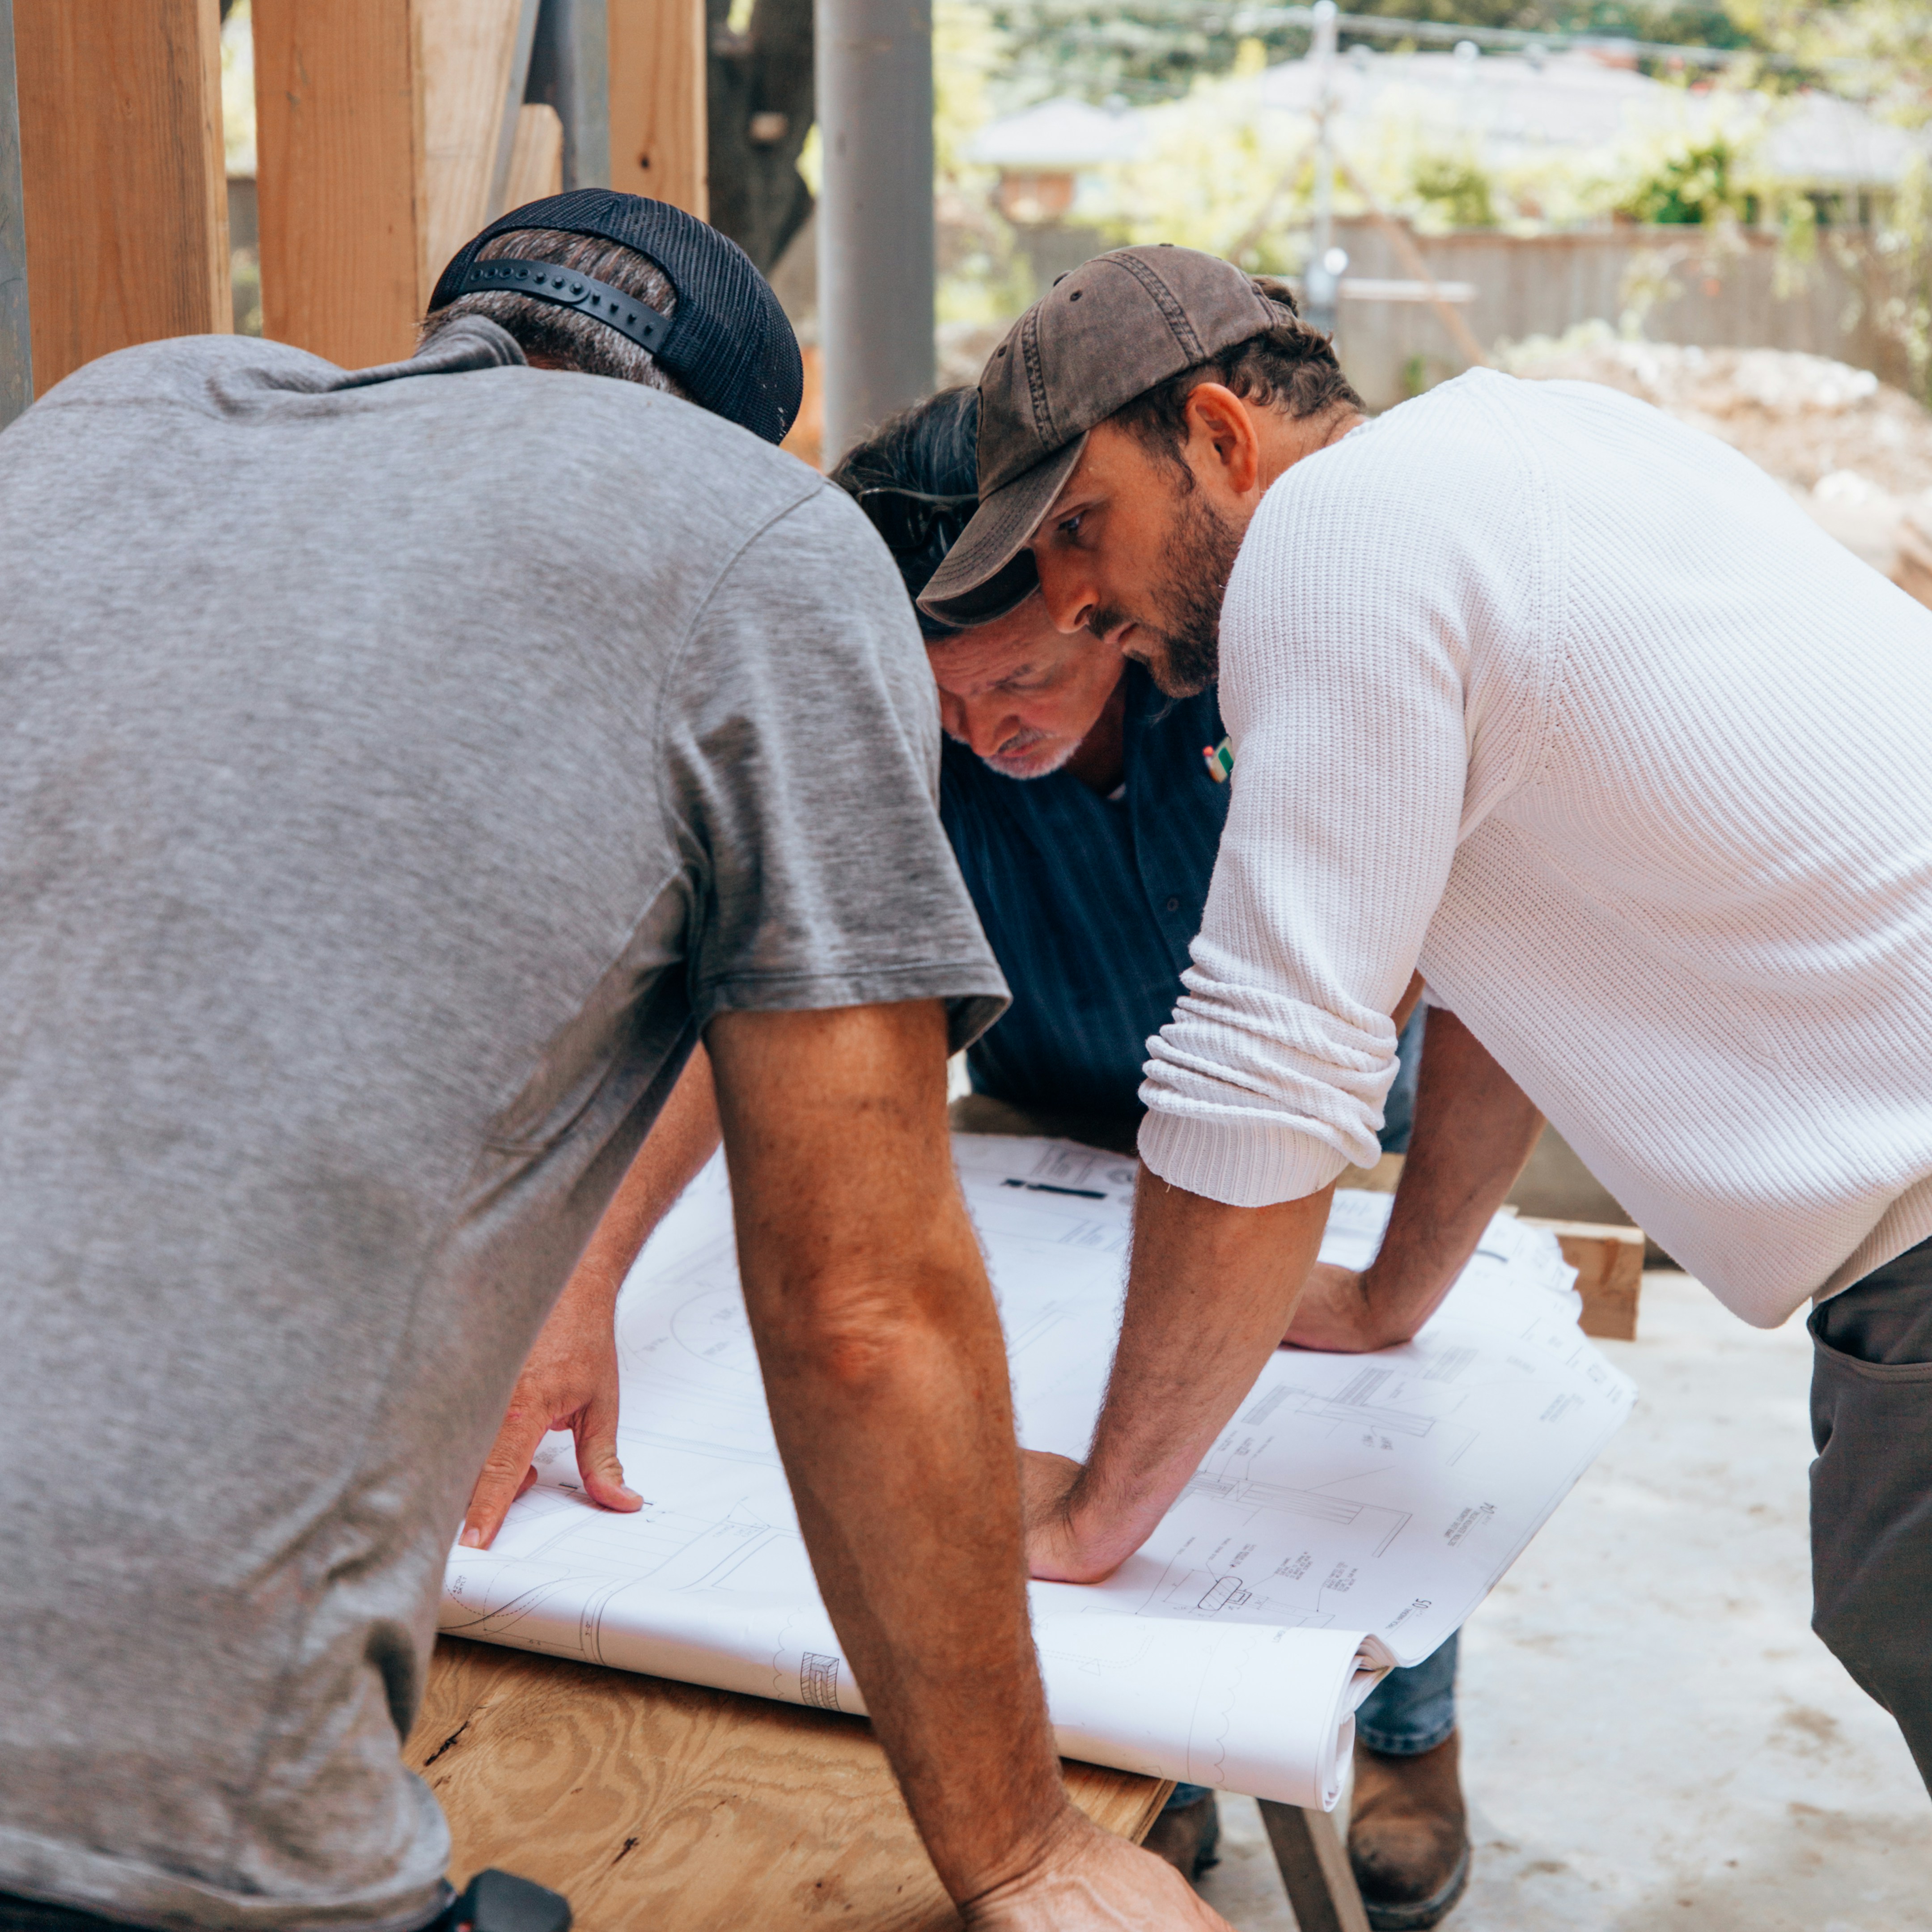 a group of men working on a project